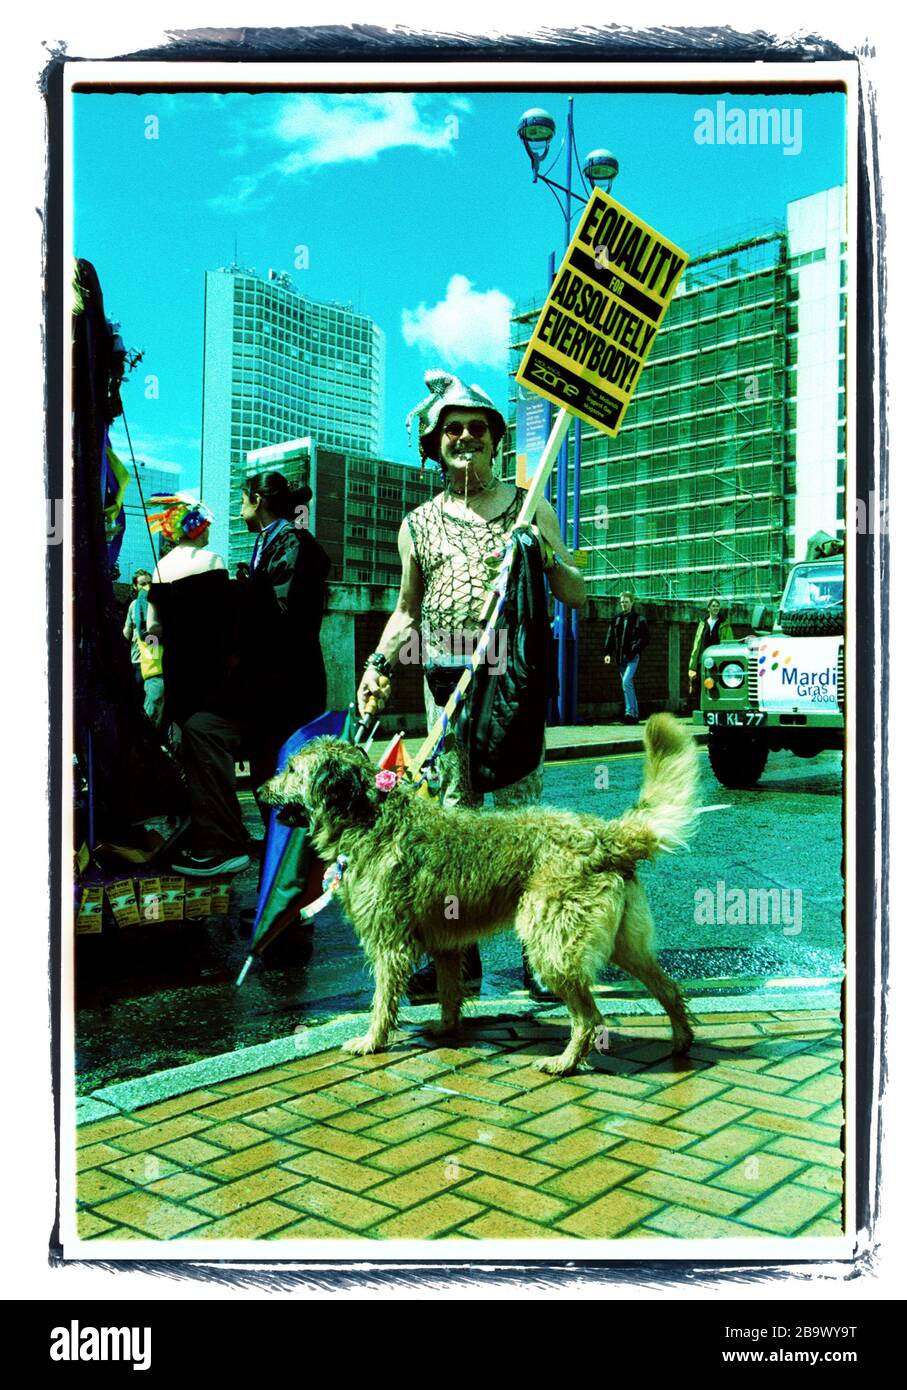 Marcher and dog at Birmingham Pride parade, cross processed film image Stock Photo